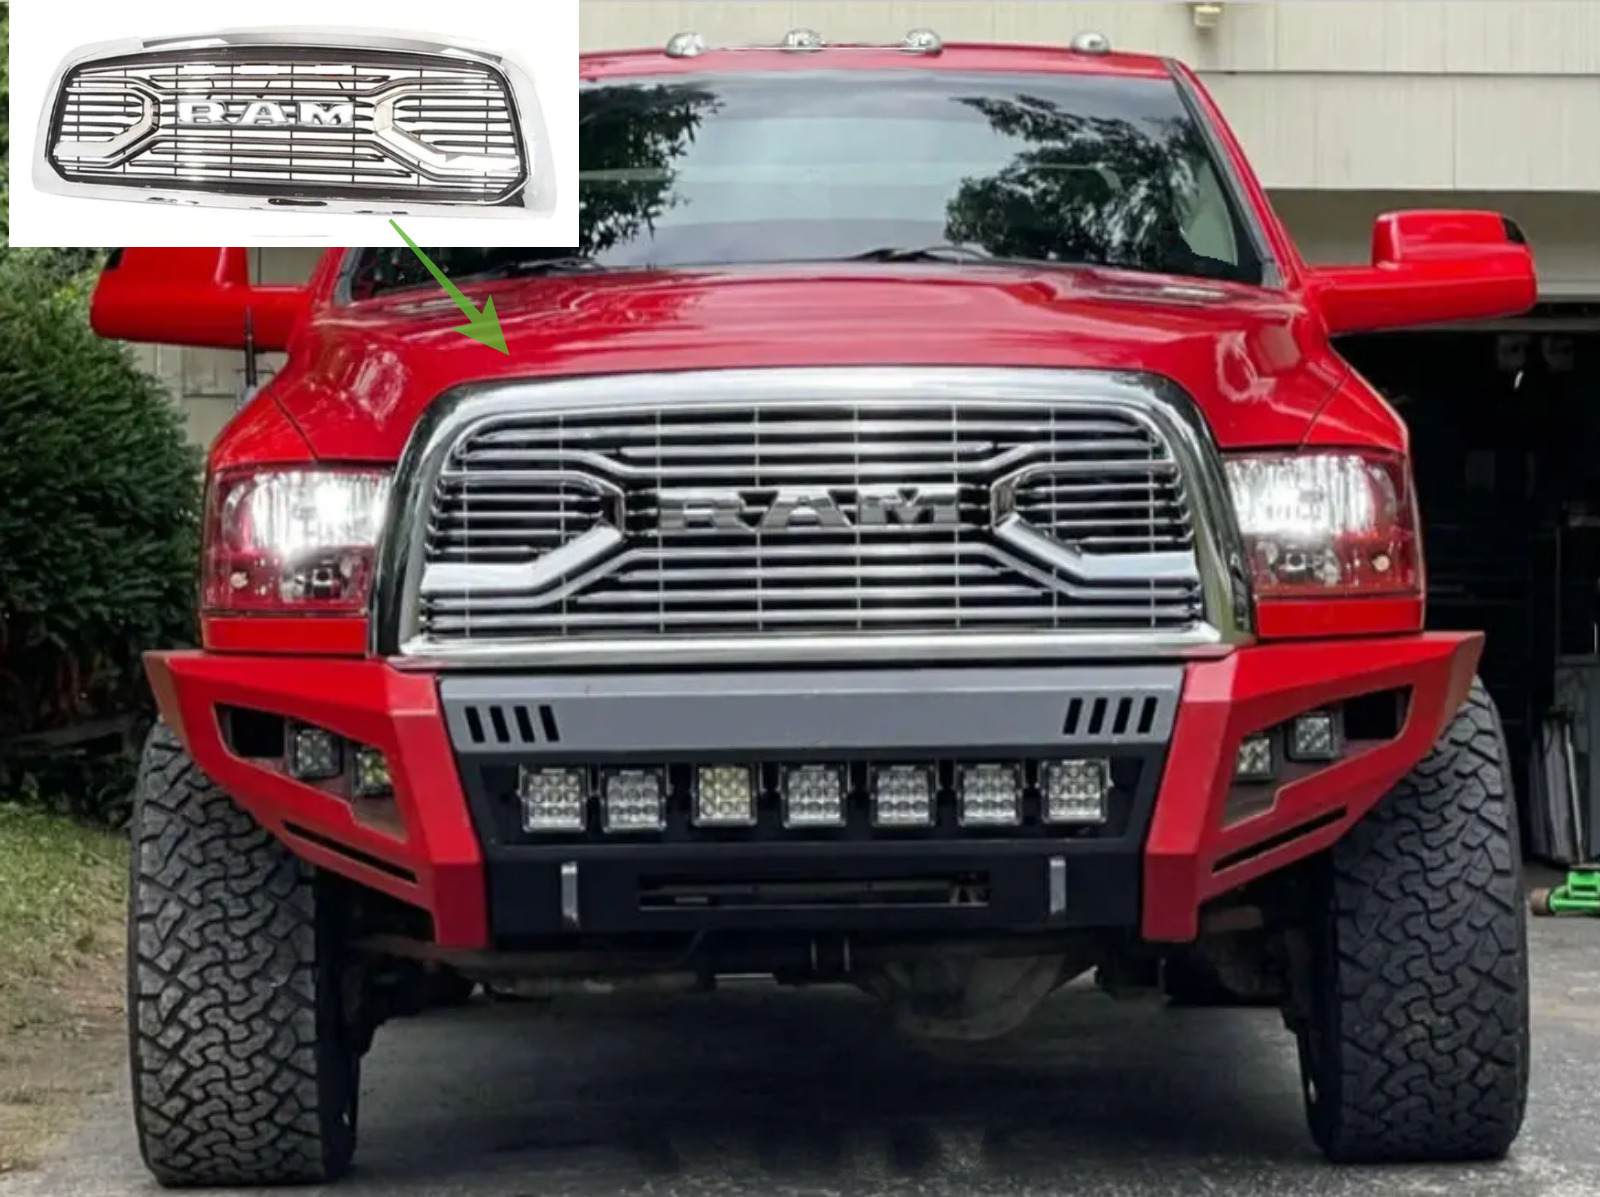 Chrome Replacement Billet Grille For 10-18 Dodge Ram 2500 3500 W/ RAM Letters